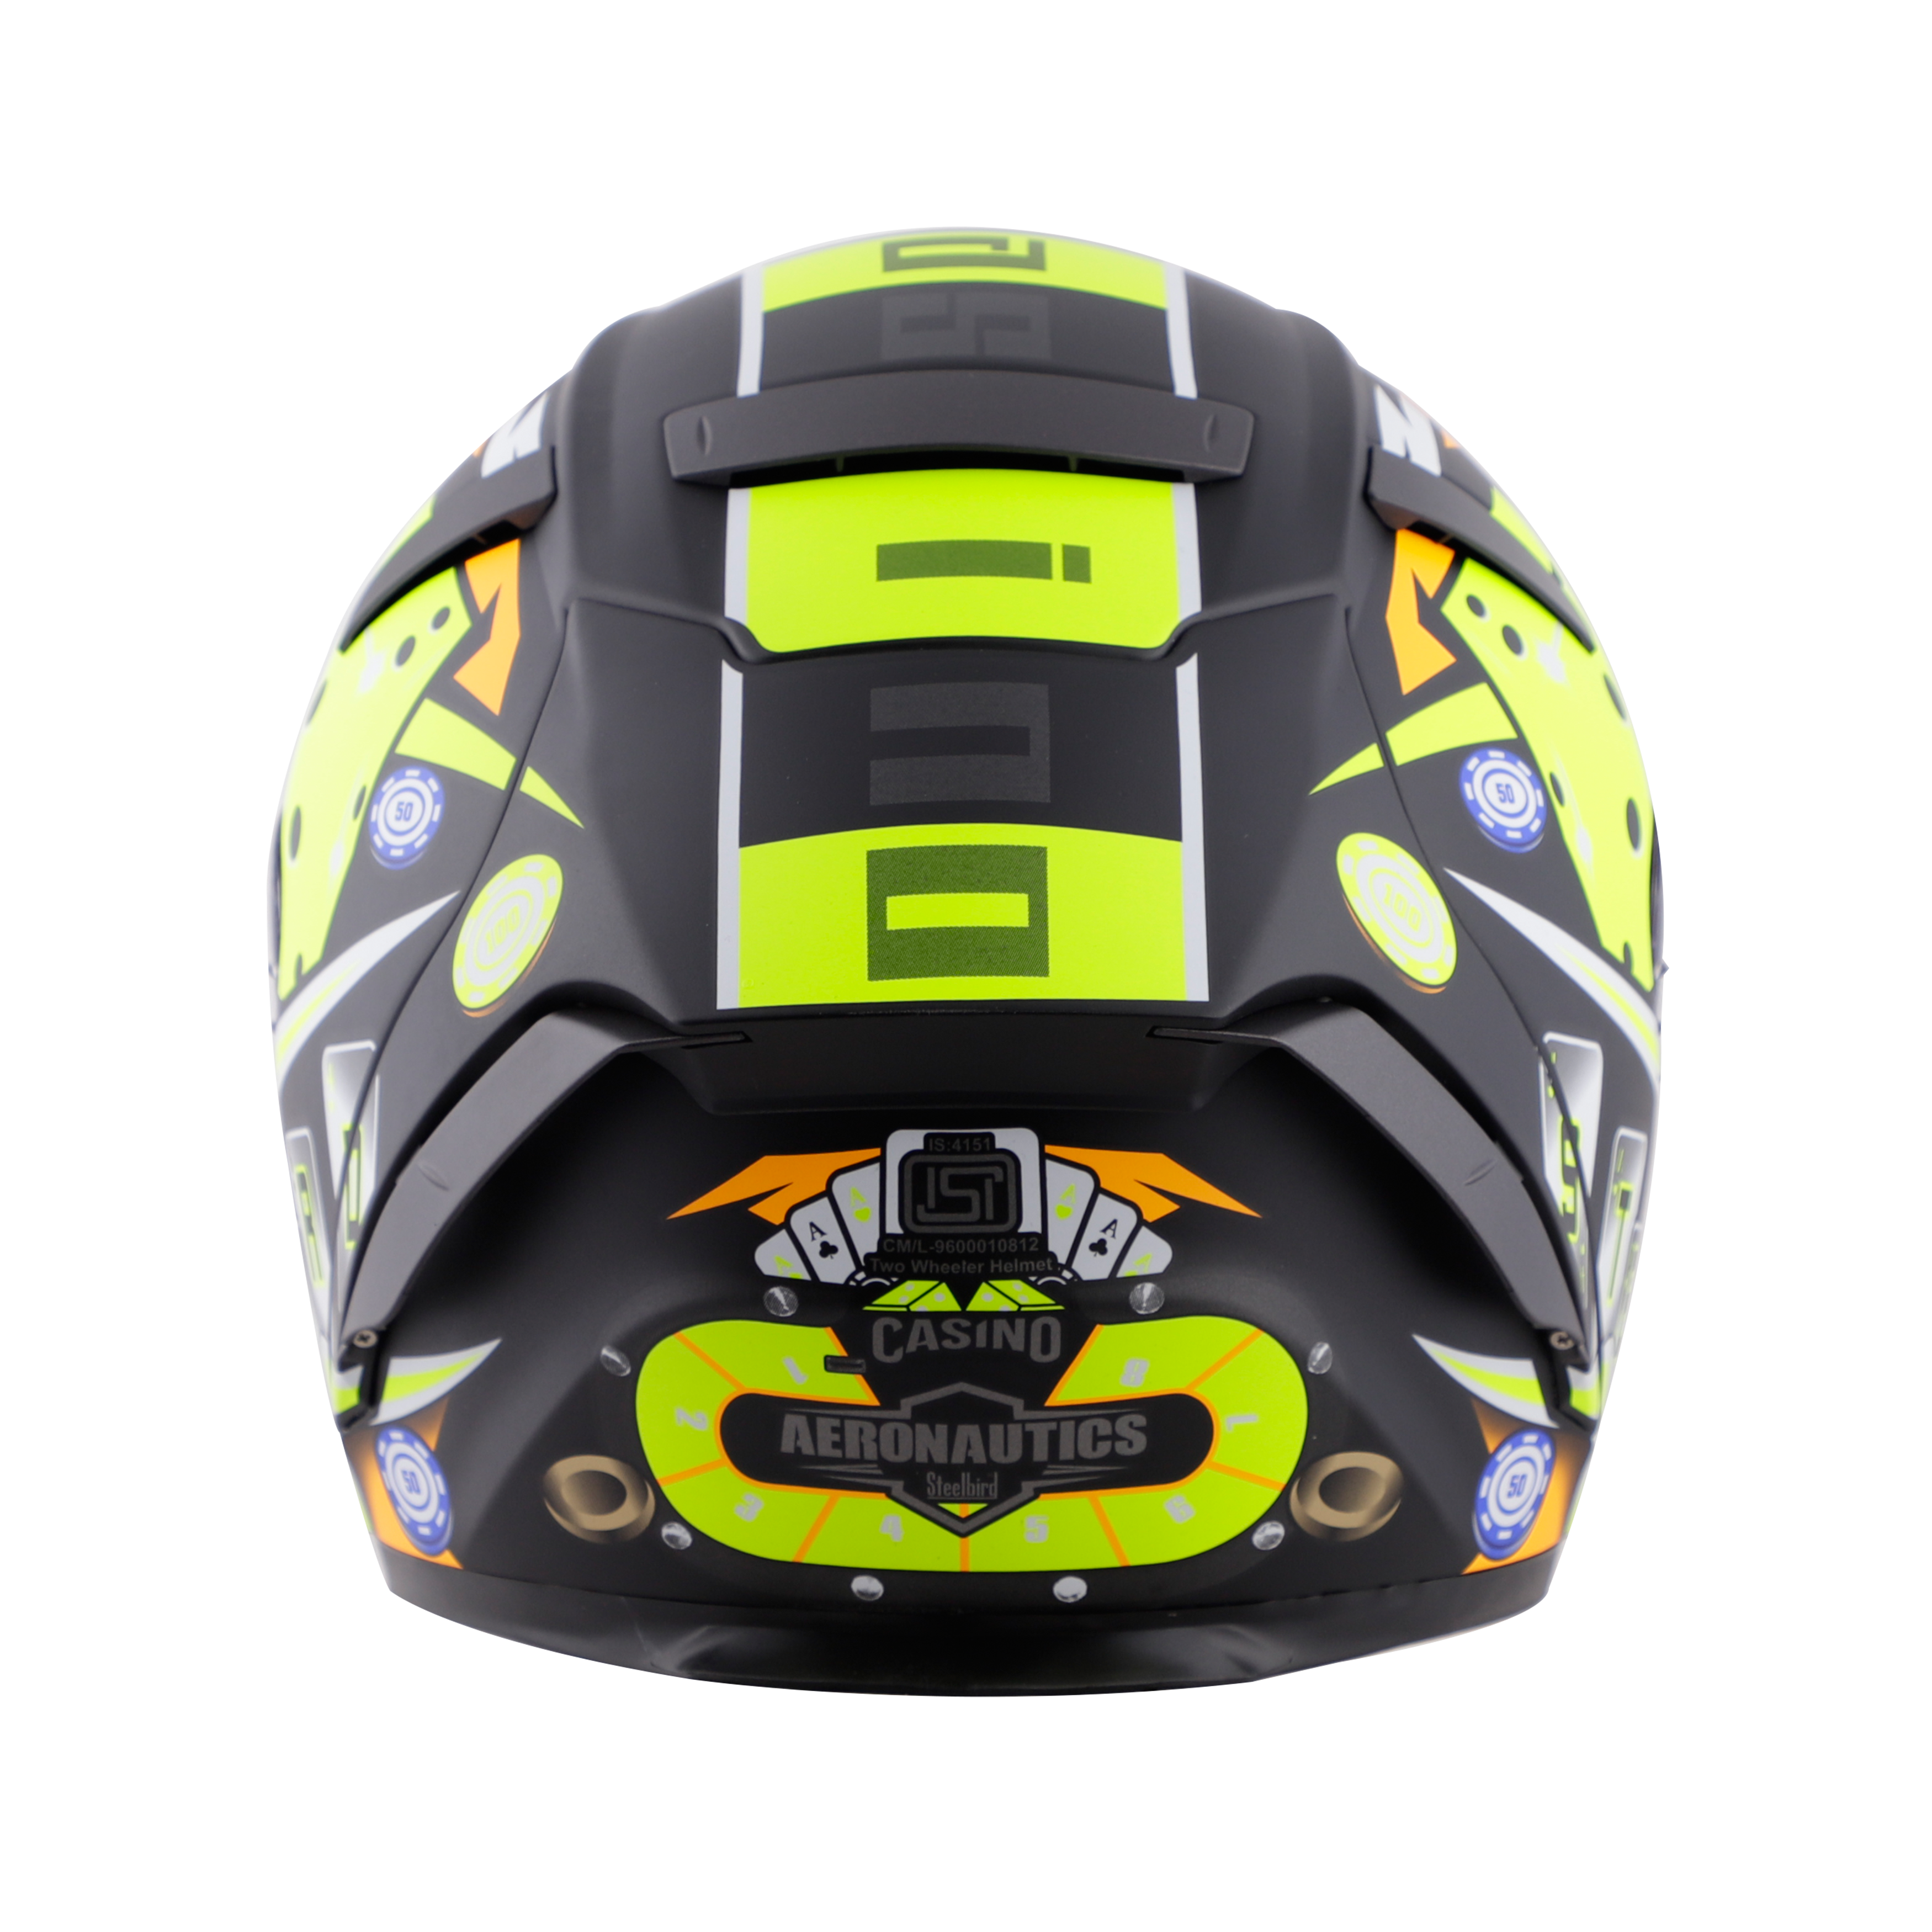 SA-2 CASINO MAT BLACK WITH NEON ( FITTED WITH CLEAR VISOR EXTRA RAINBOW CHROME VISOR FREE WITH ANTI-FOG SHIELD HOLDER)